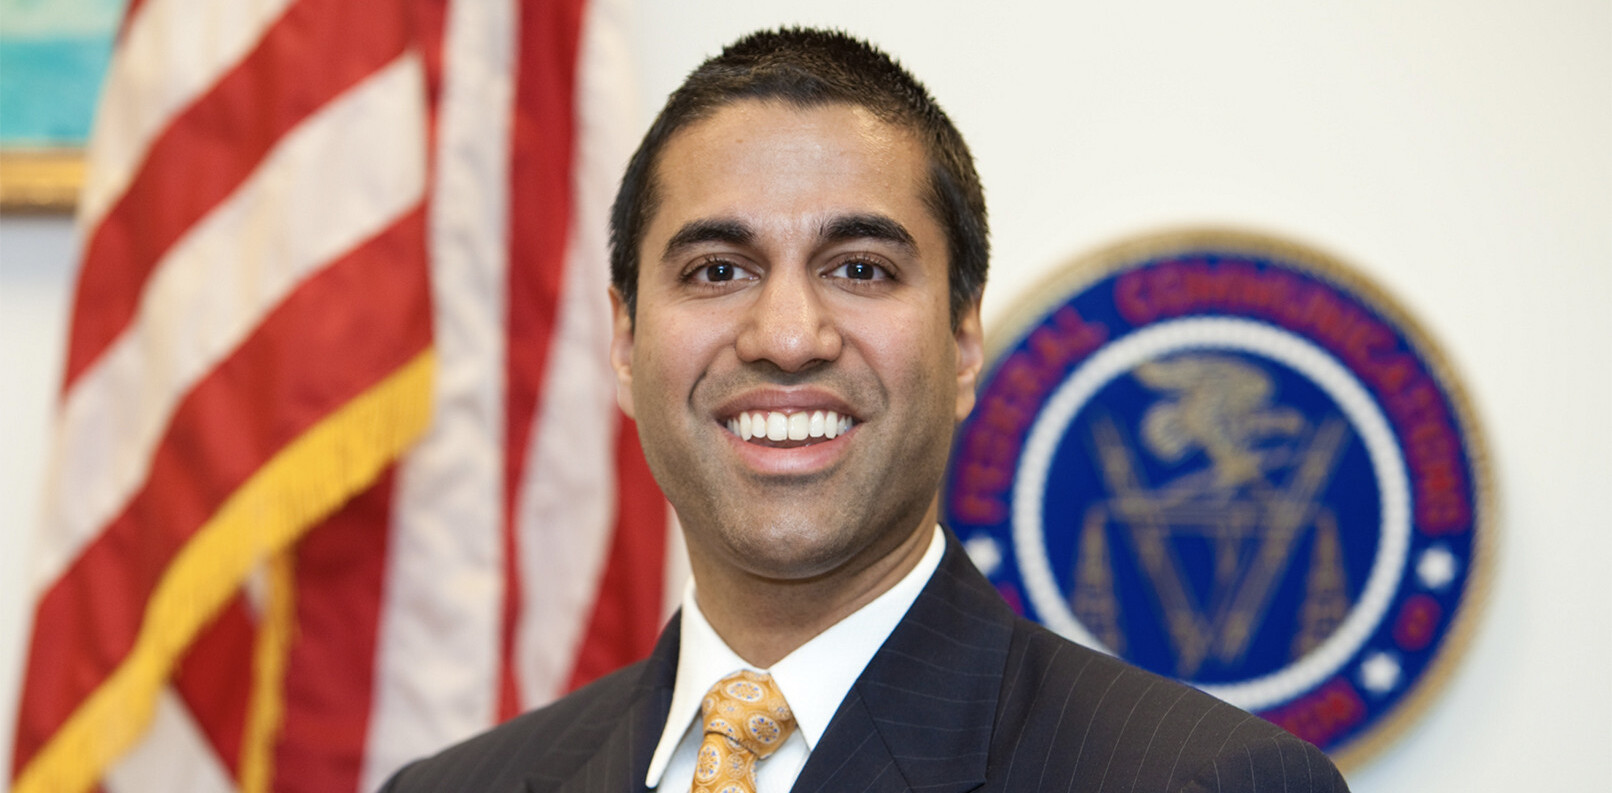 Court upholds FCC net neutrality repeal, but there’s still hope